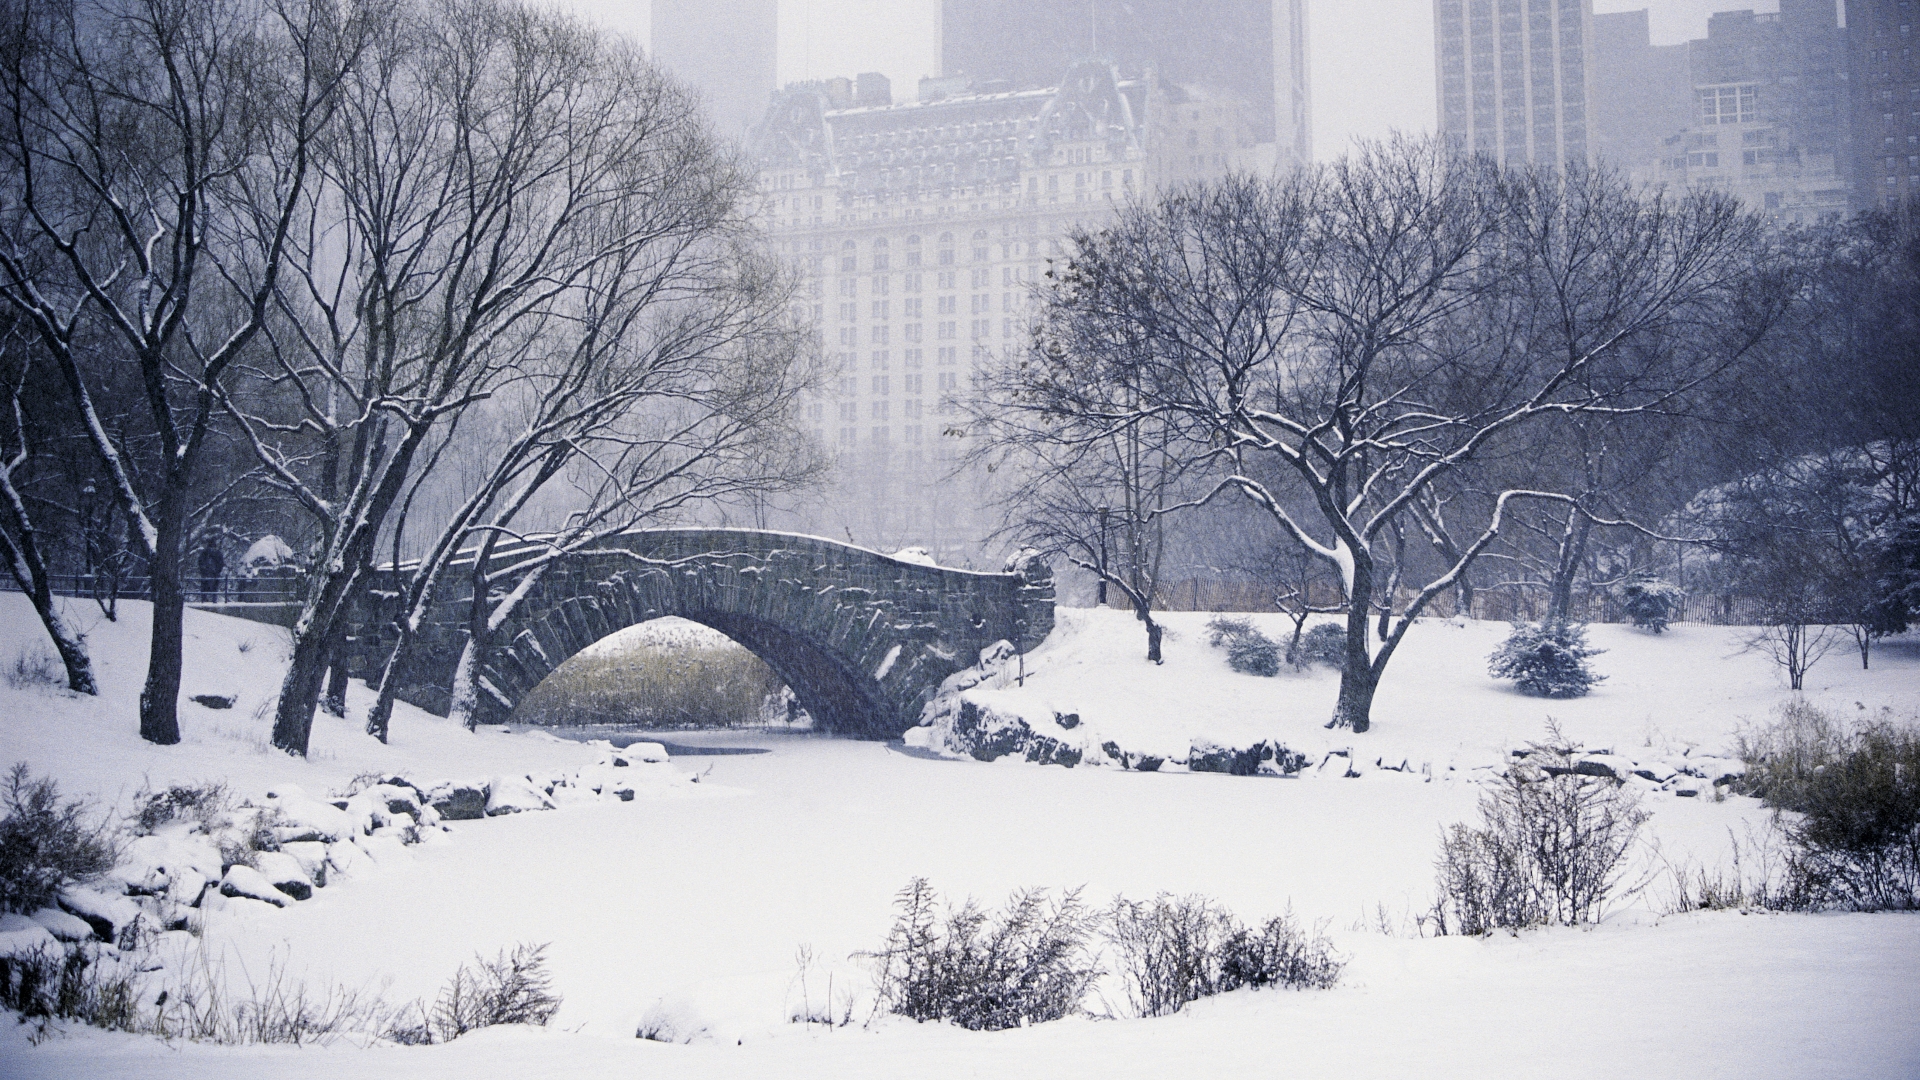 Winter in the City Park widescreen wallpaper. Wide